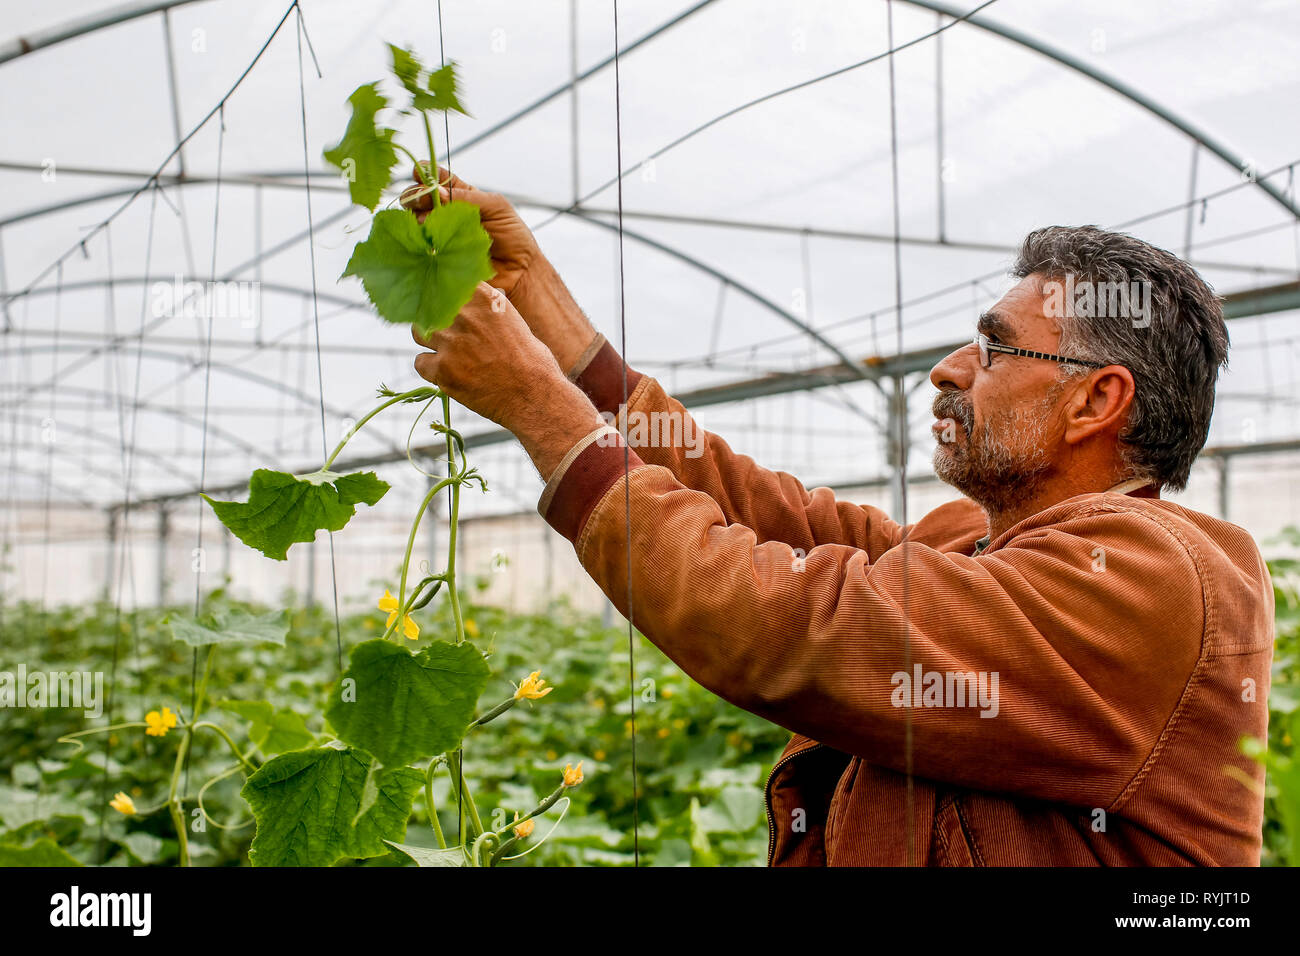 Mahmoud Salaheddin Salahat, a client of ACAD finance, working in his greenhouse in Wadi al Farrah, West Bank, Palestine. Stock Photo